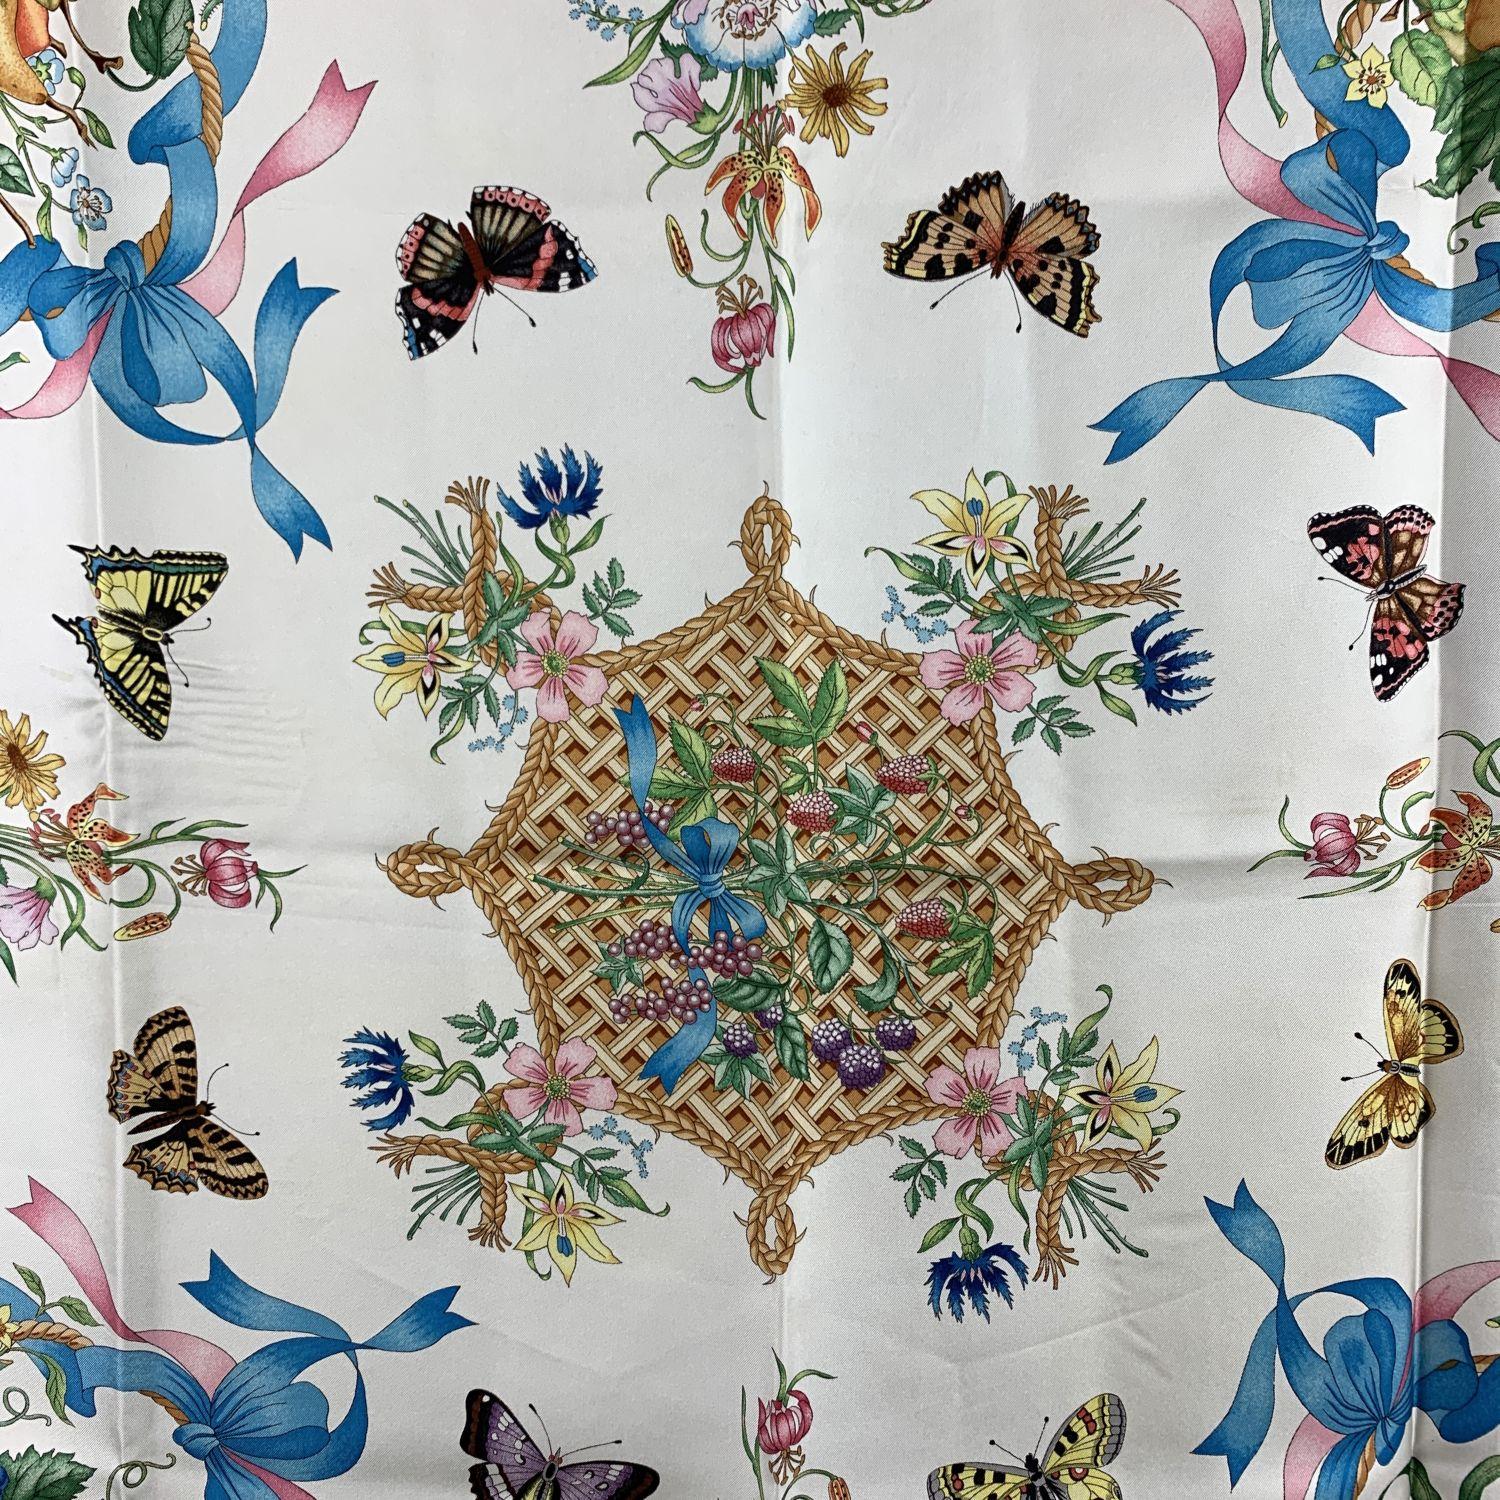 Gucci vintage silk scarf design by Vittorio Accornero in the 70s. Multicolor, baskets and fruits and ribbons and butterflies design on white background. Blue borders. 100% Silk - Printed GUCCI signature, 'V.Accornero' signature printed on the scarf.